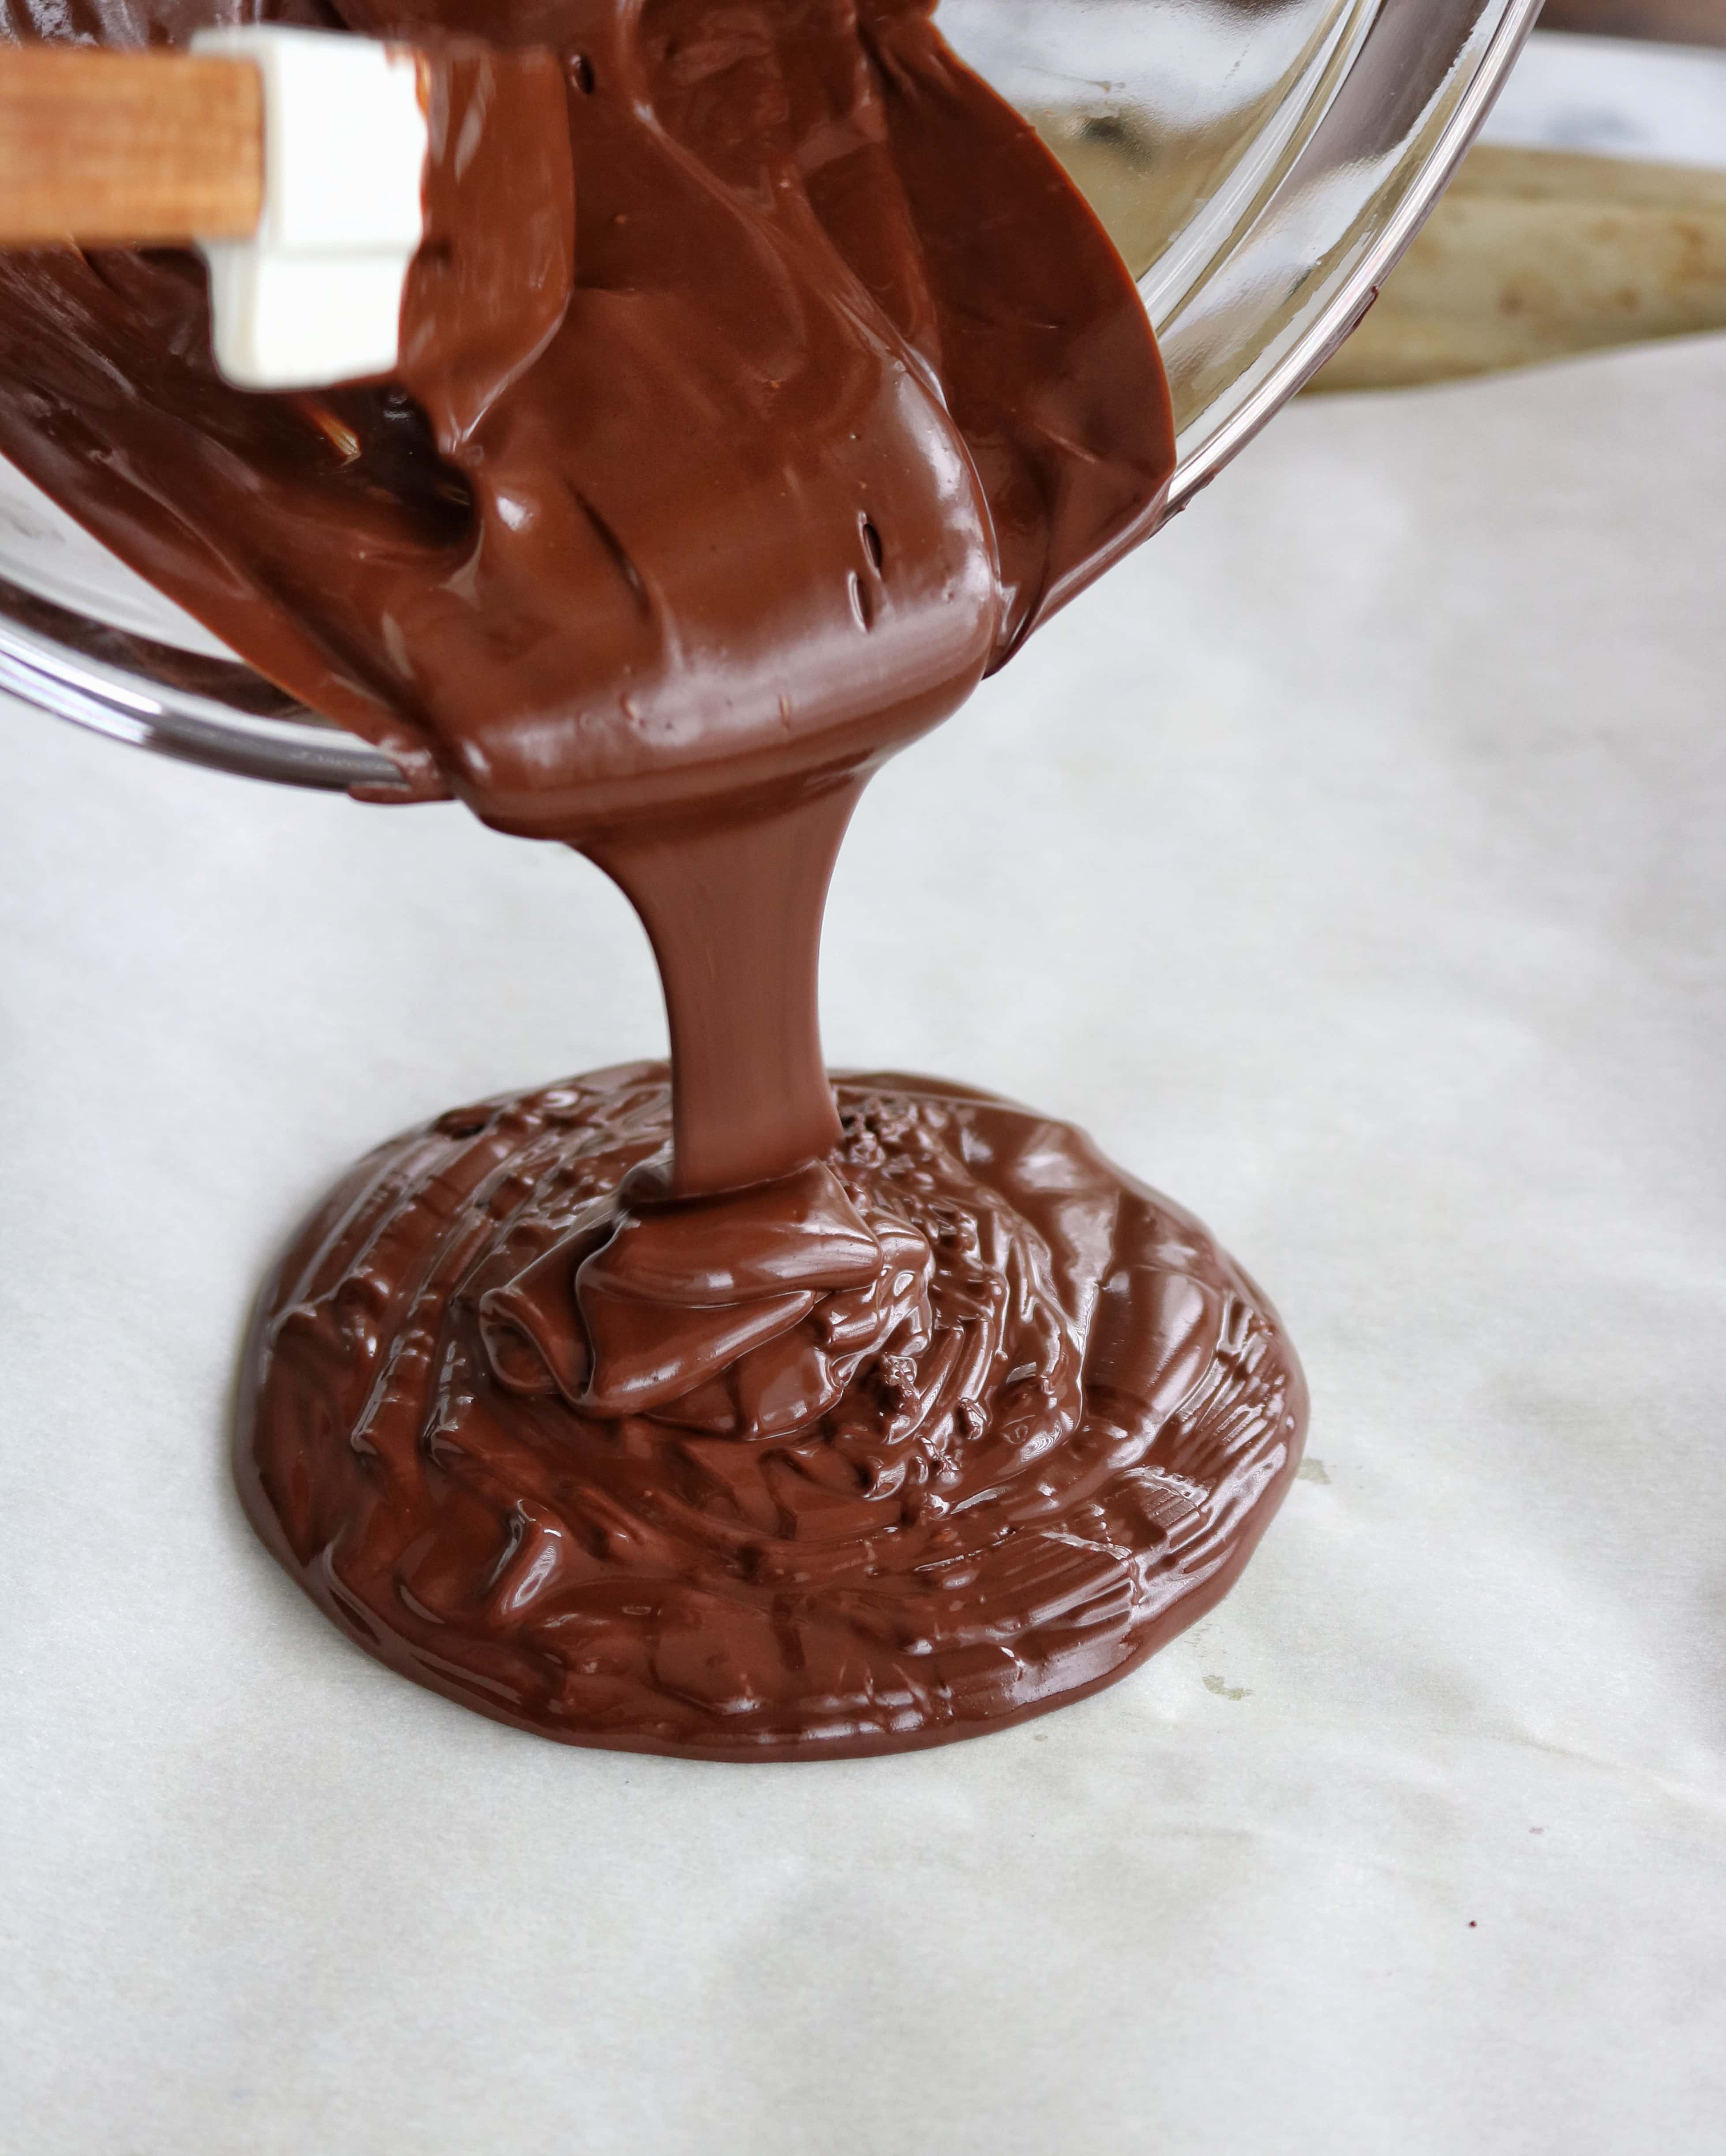 Dark chocolate being poured onto parchment paper | The Nutrition Adventure 